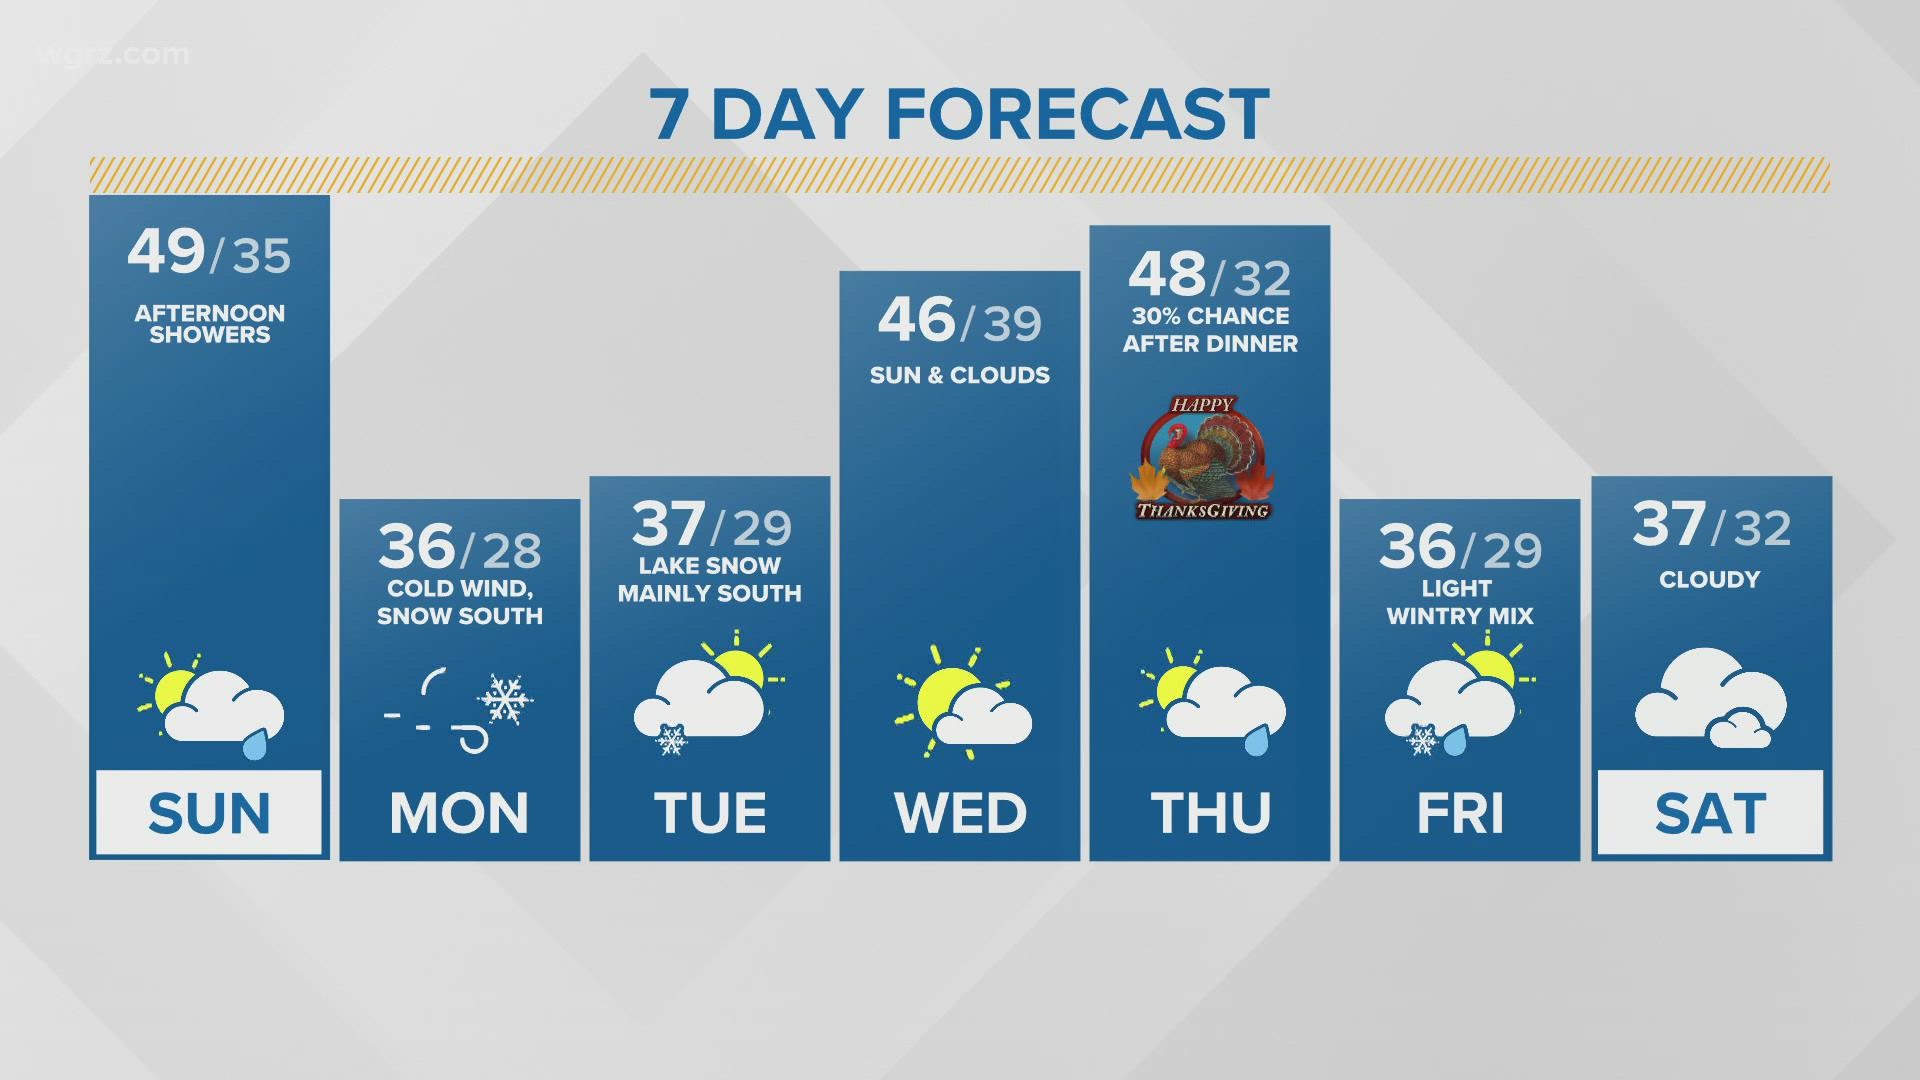 Storm Team 2 has your weekend weather and 7-day forecast.